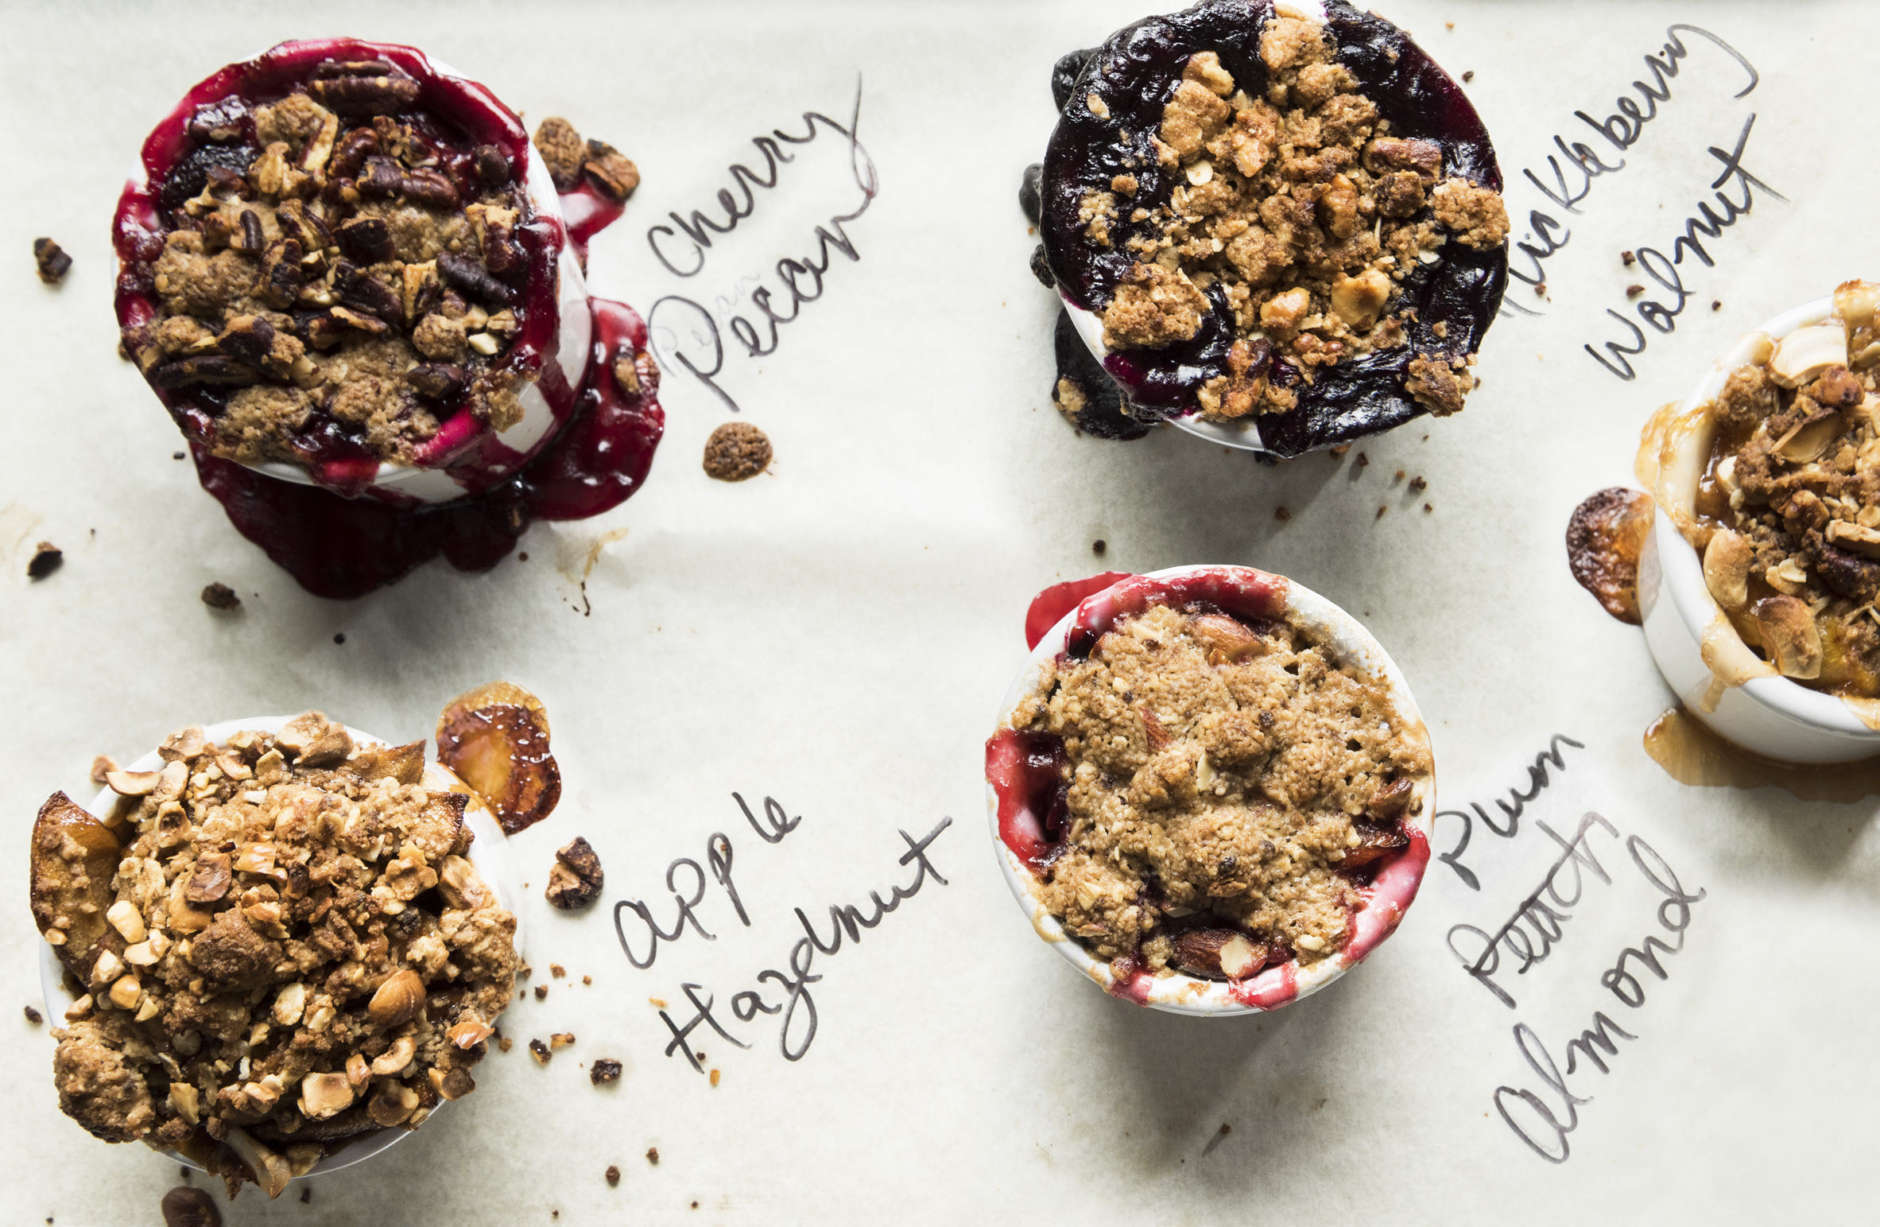 Yosses' recipe for fruit crisps with nut topping utilizes thyme and essential oils (Courtesy Penguin Random House/Evan Sung)